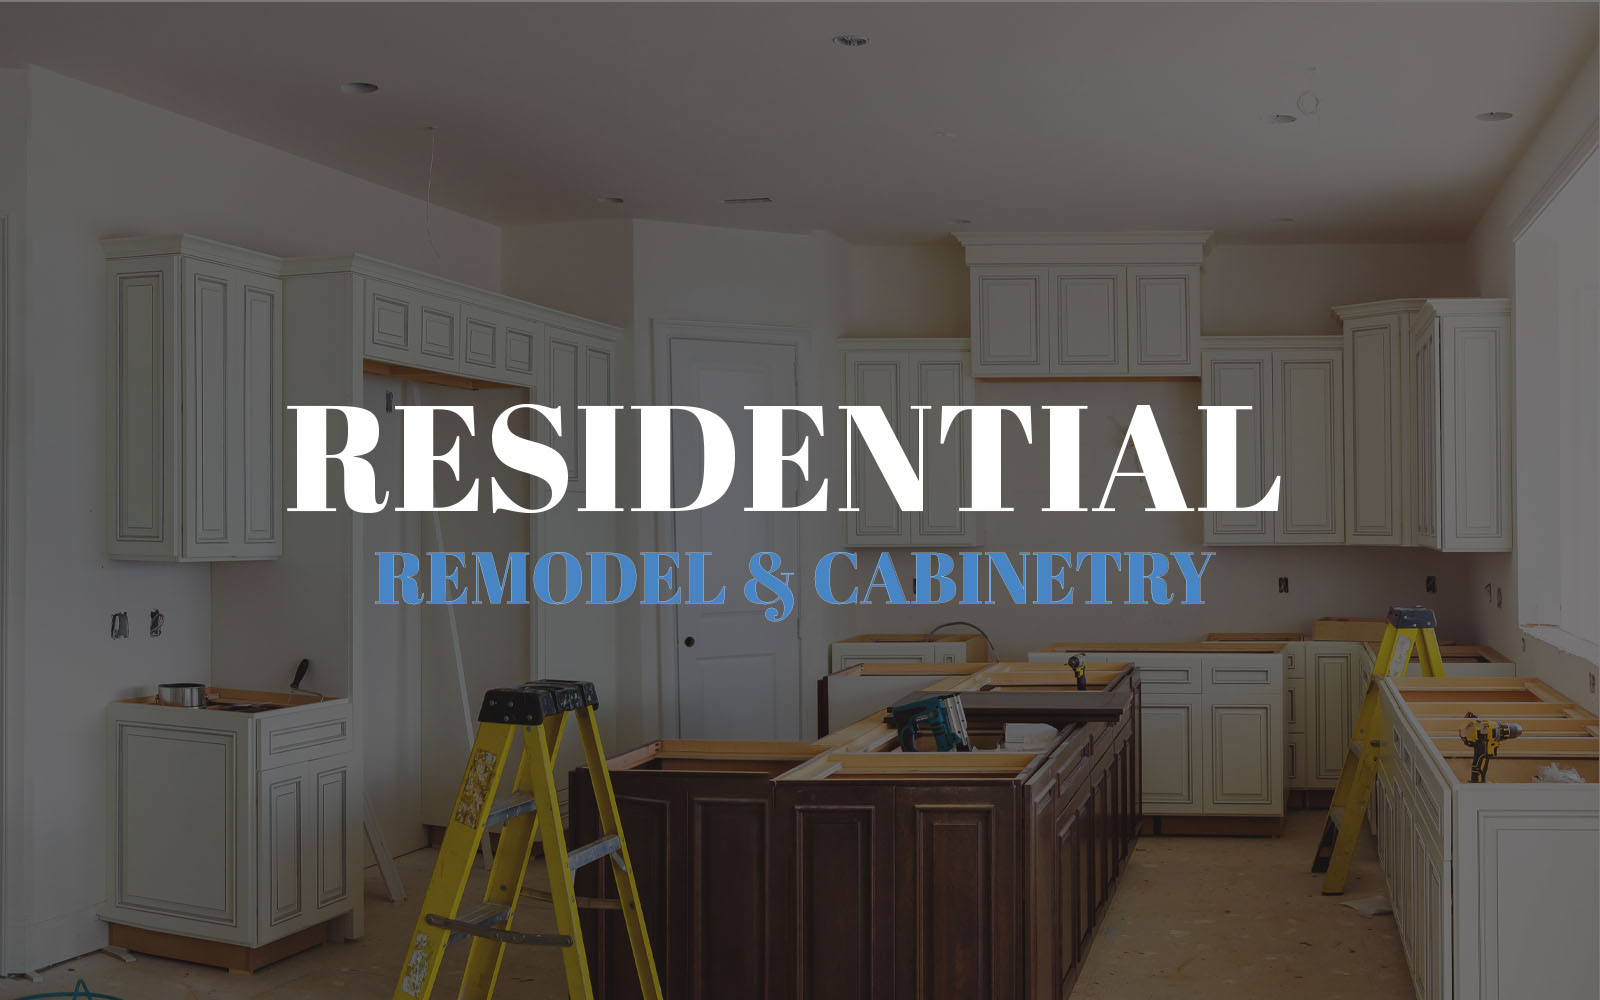 Residential Cabinets & Remodel